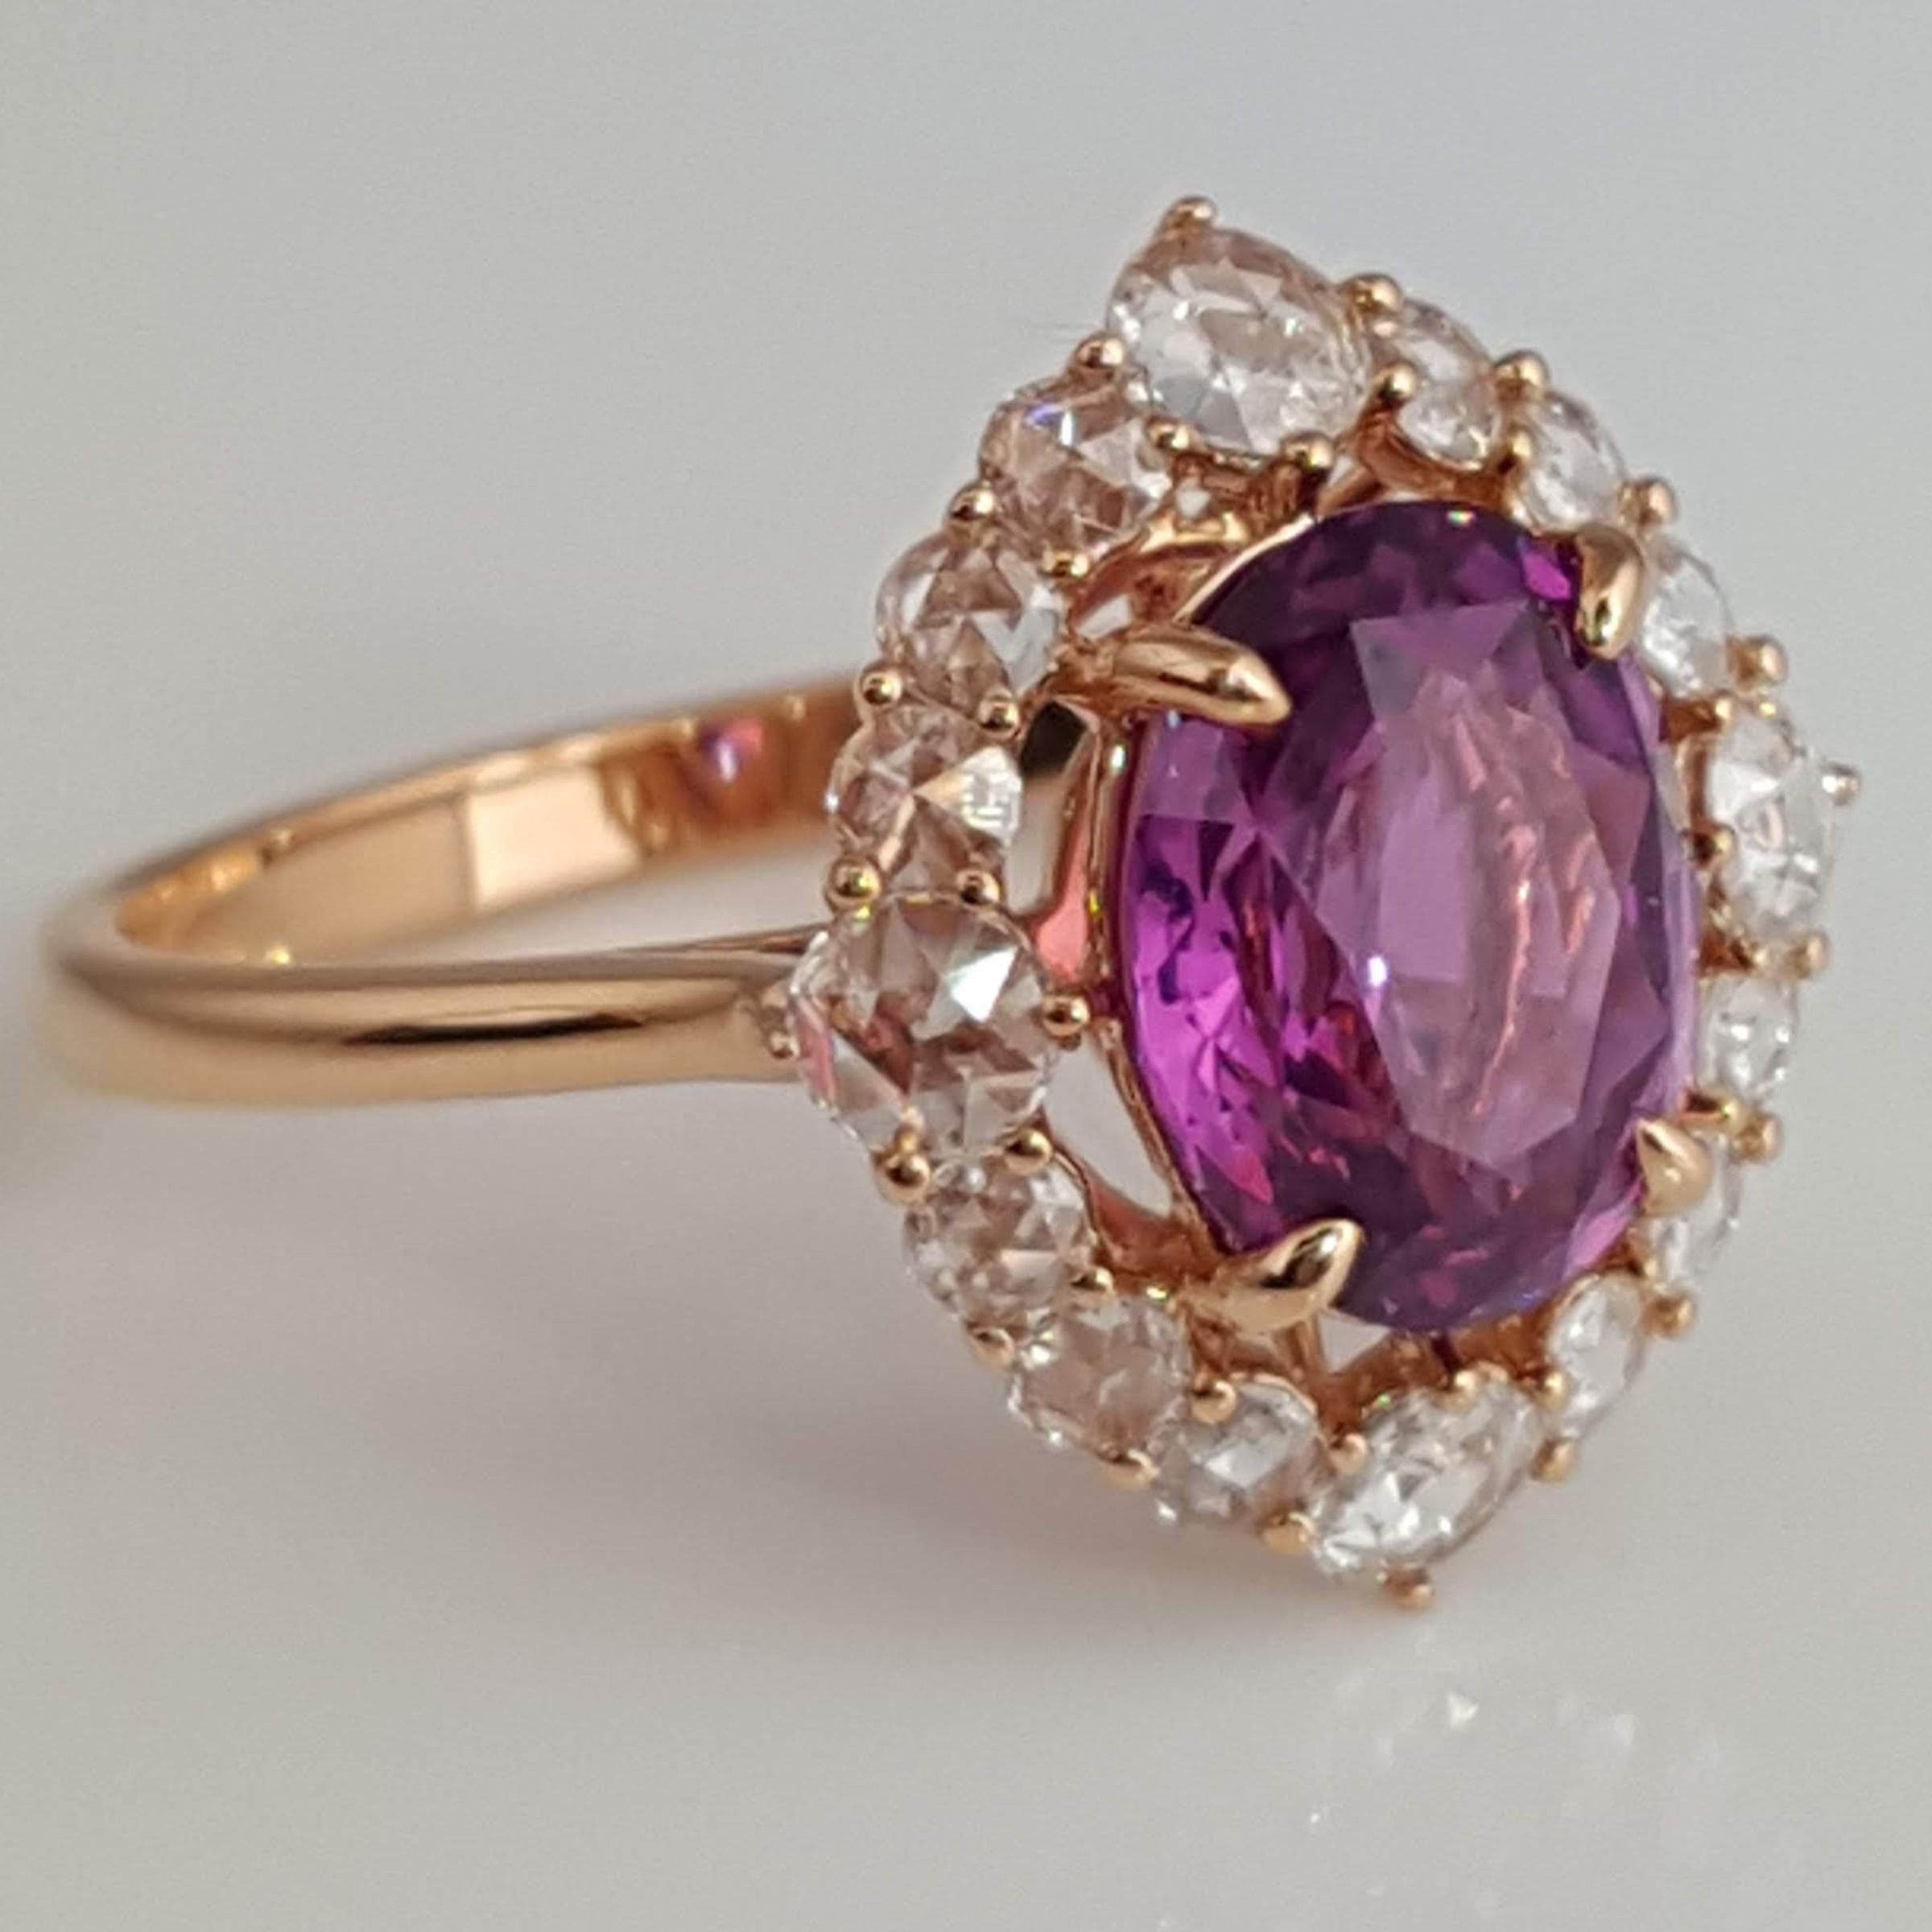 Contemporary GIA Certified 2.48 Carat Oval Cut Purple-Pink Sapphire Ring in 18k Rose Gold